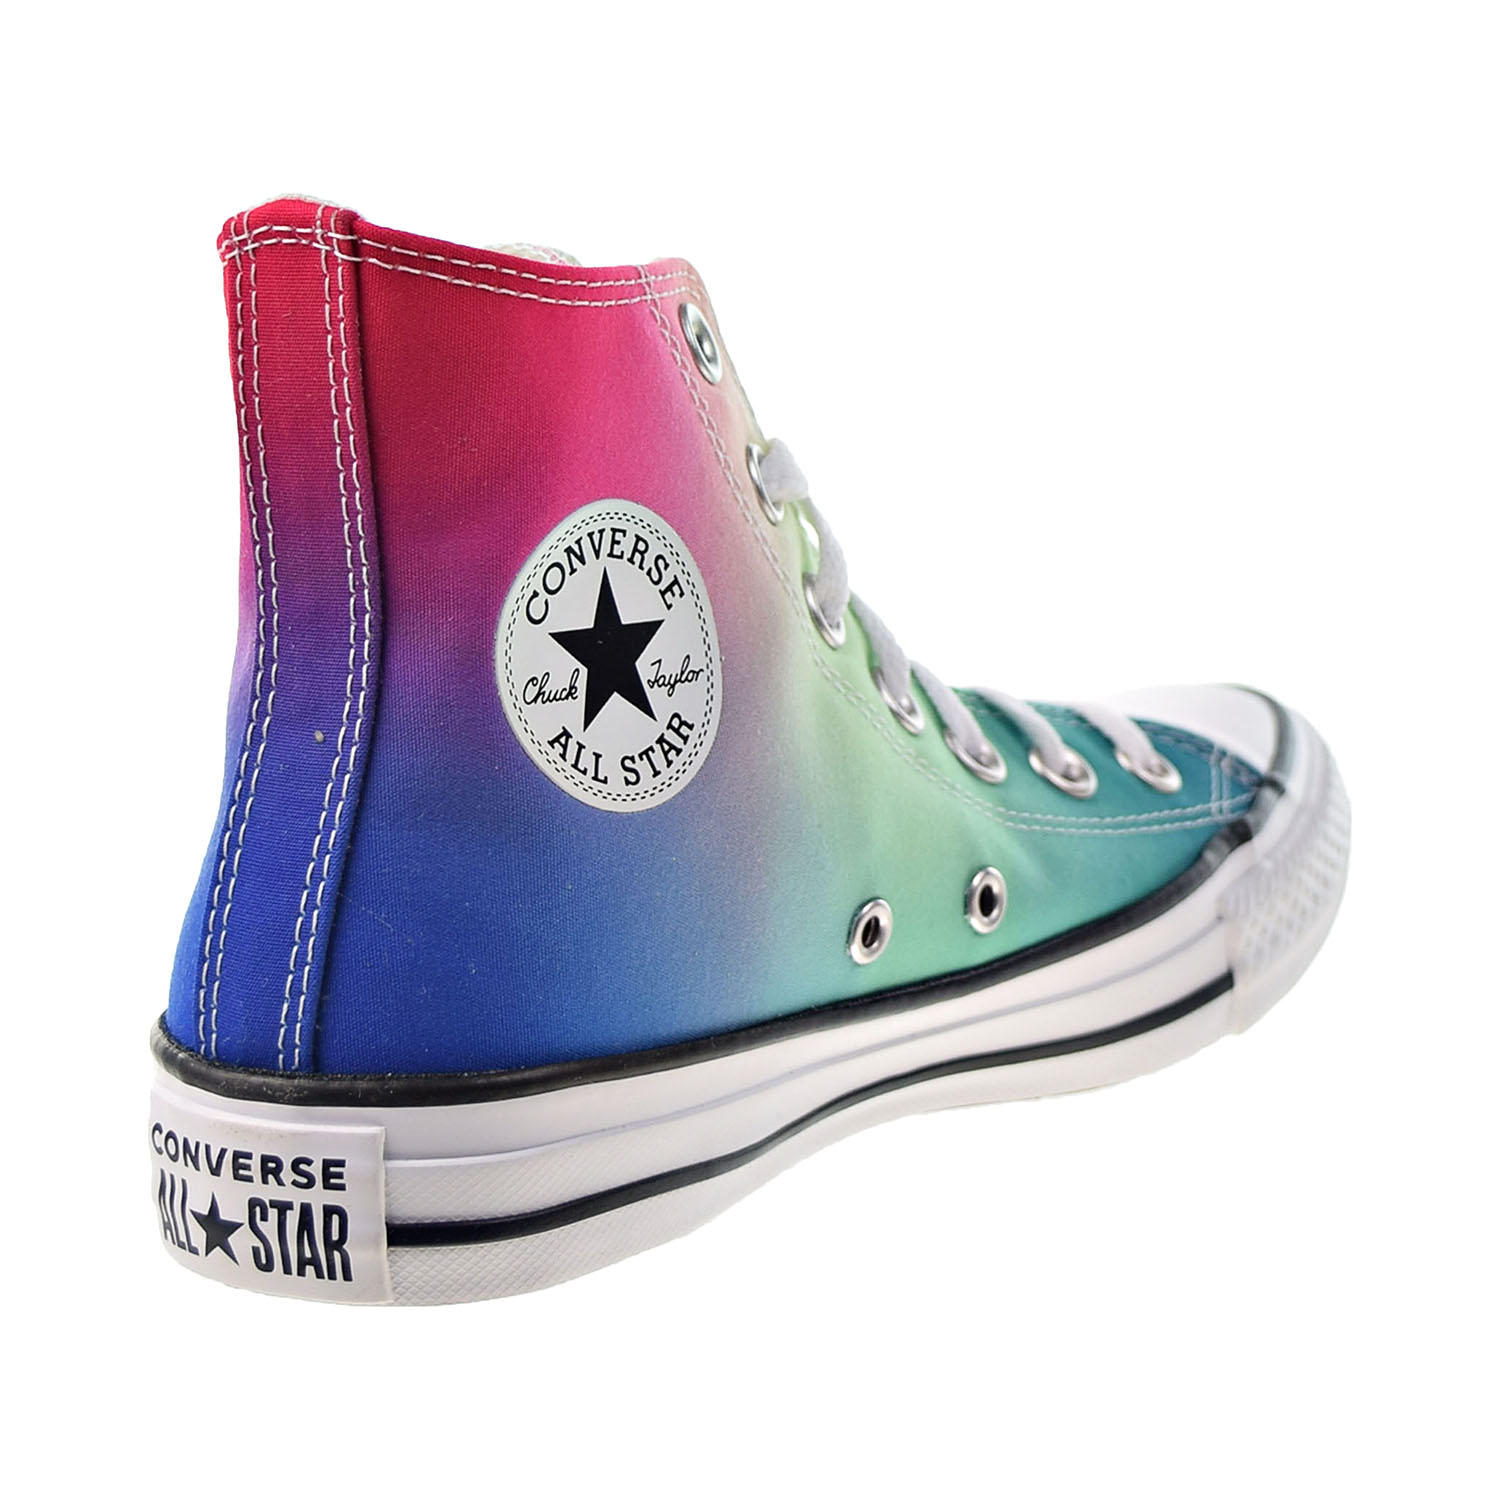 Converse Chuck Taylor All Star Hi "Psychadelic Hoops" Men's Shoes White 167592c - image 3 of 6